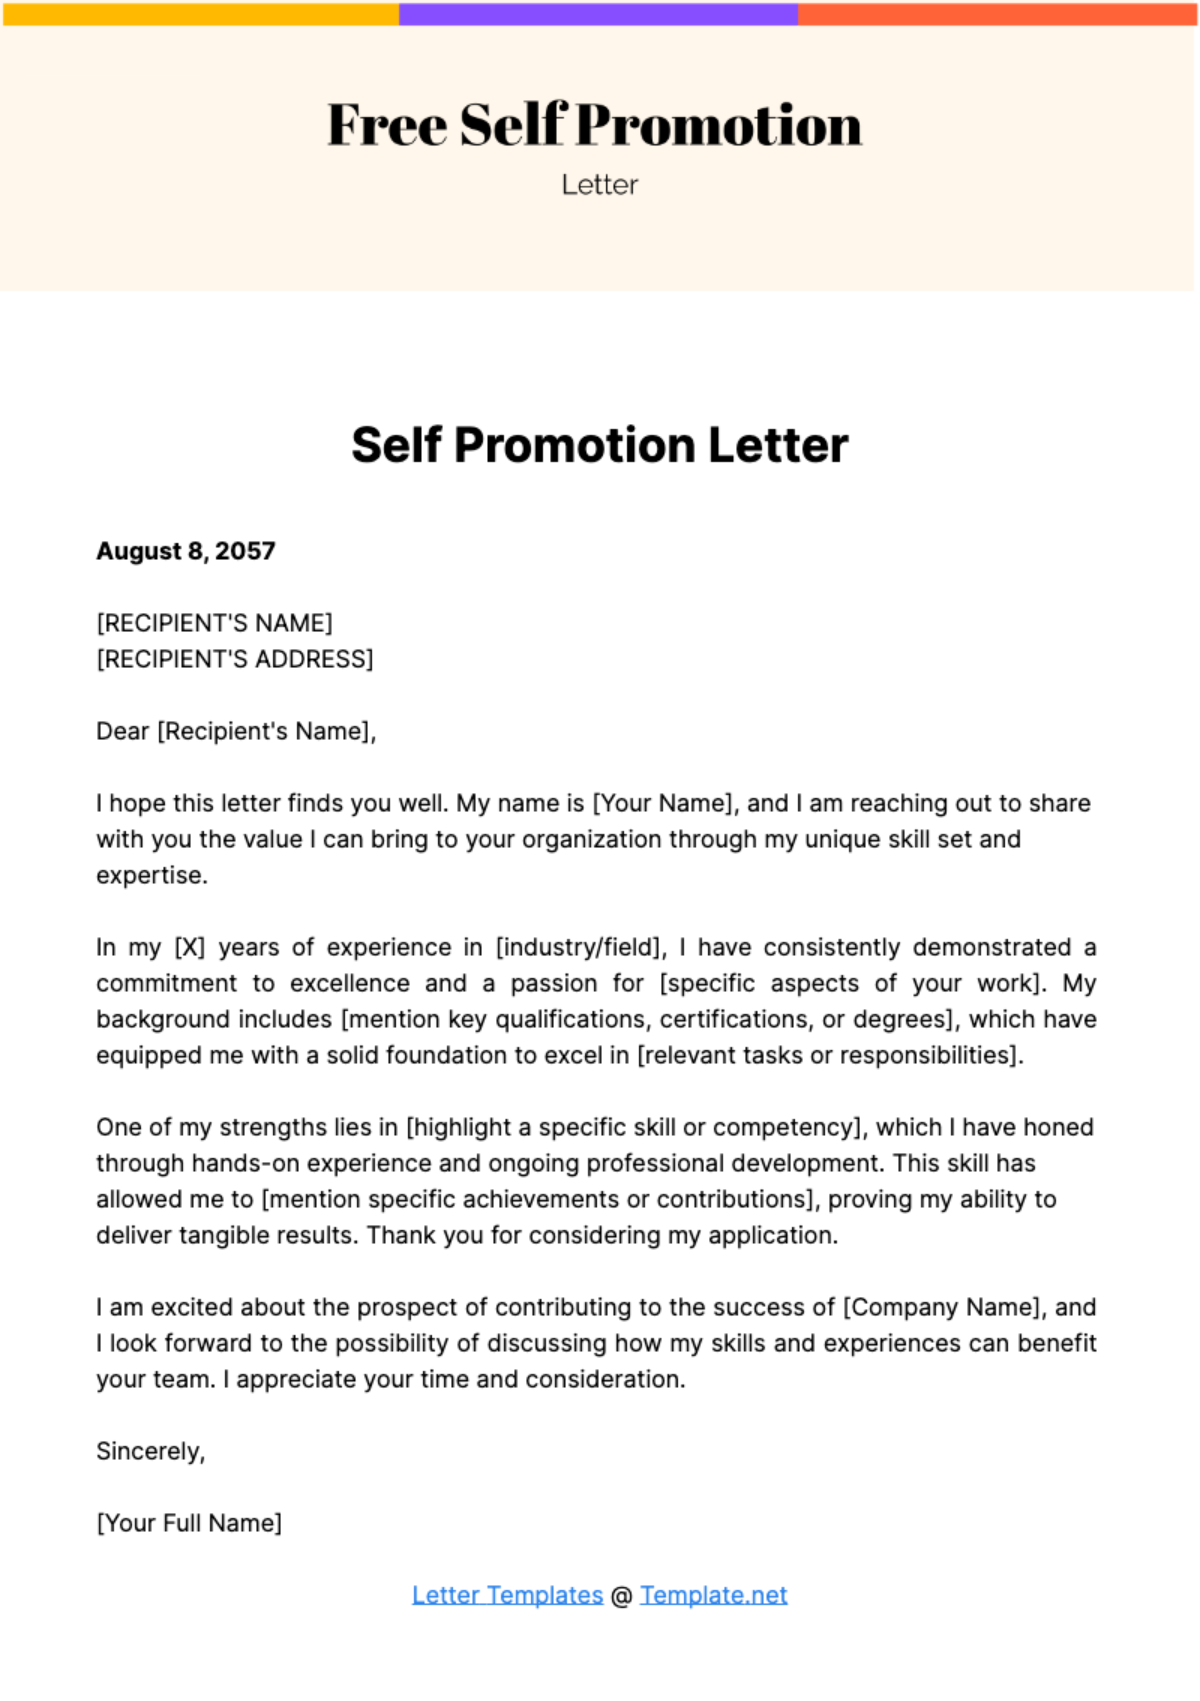 Free Self Promotion Letter Template